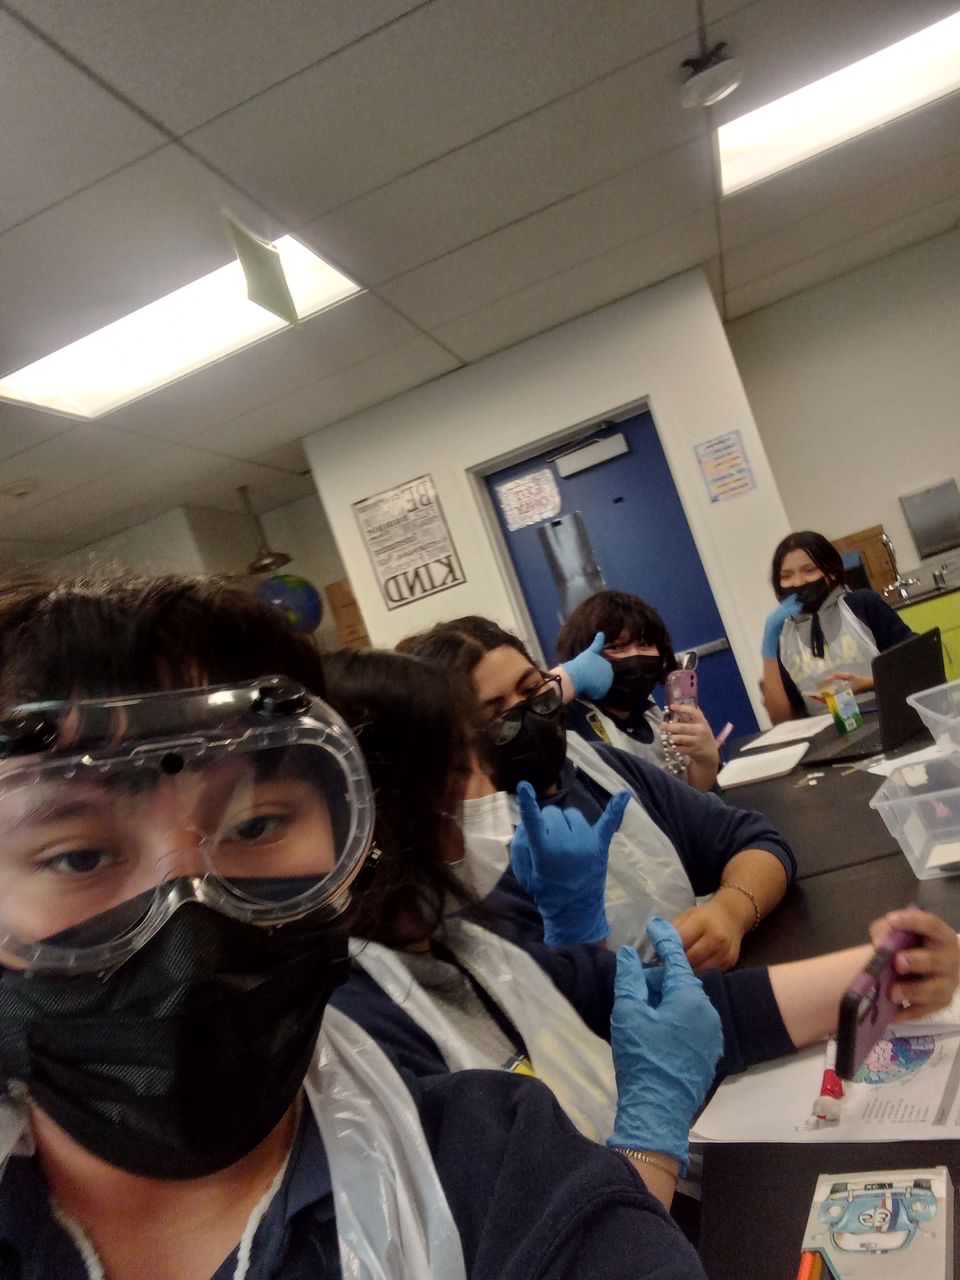 Jennifer and her friends in science class.